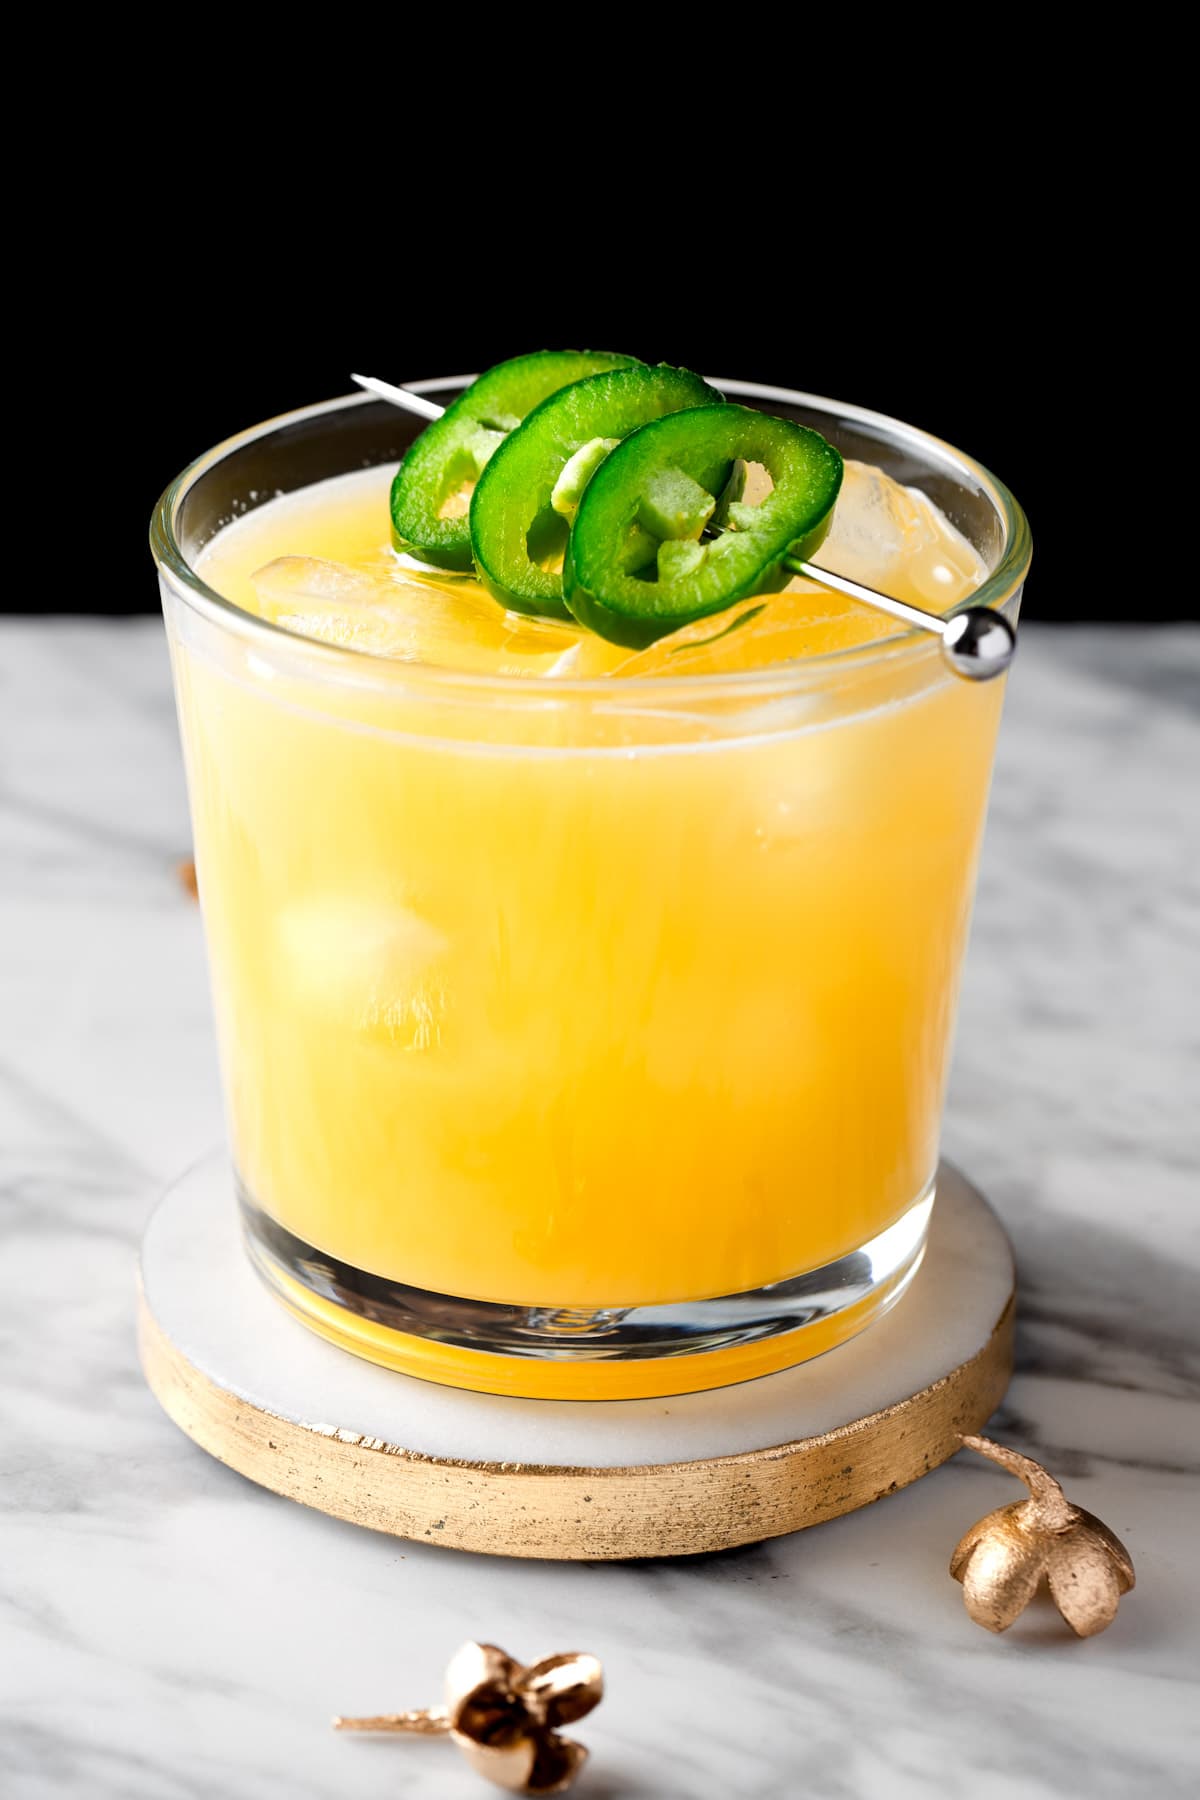 A pineapple mezcal cocktail garnished with jalapeno slices, on a white and black background.